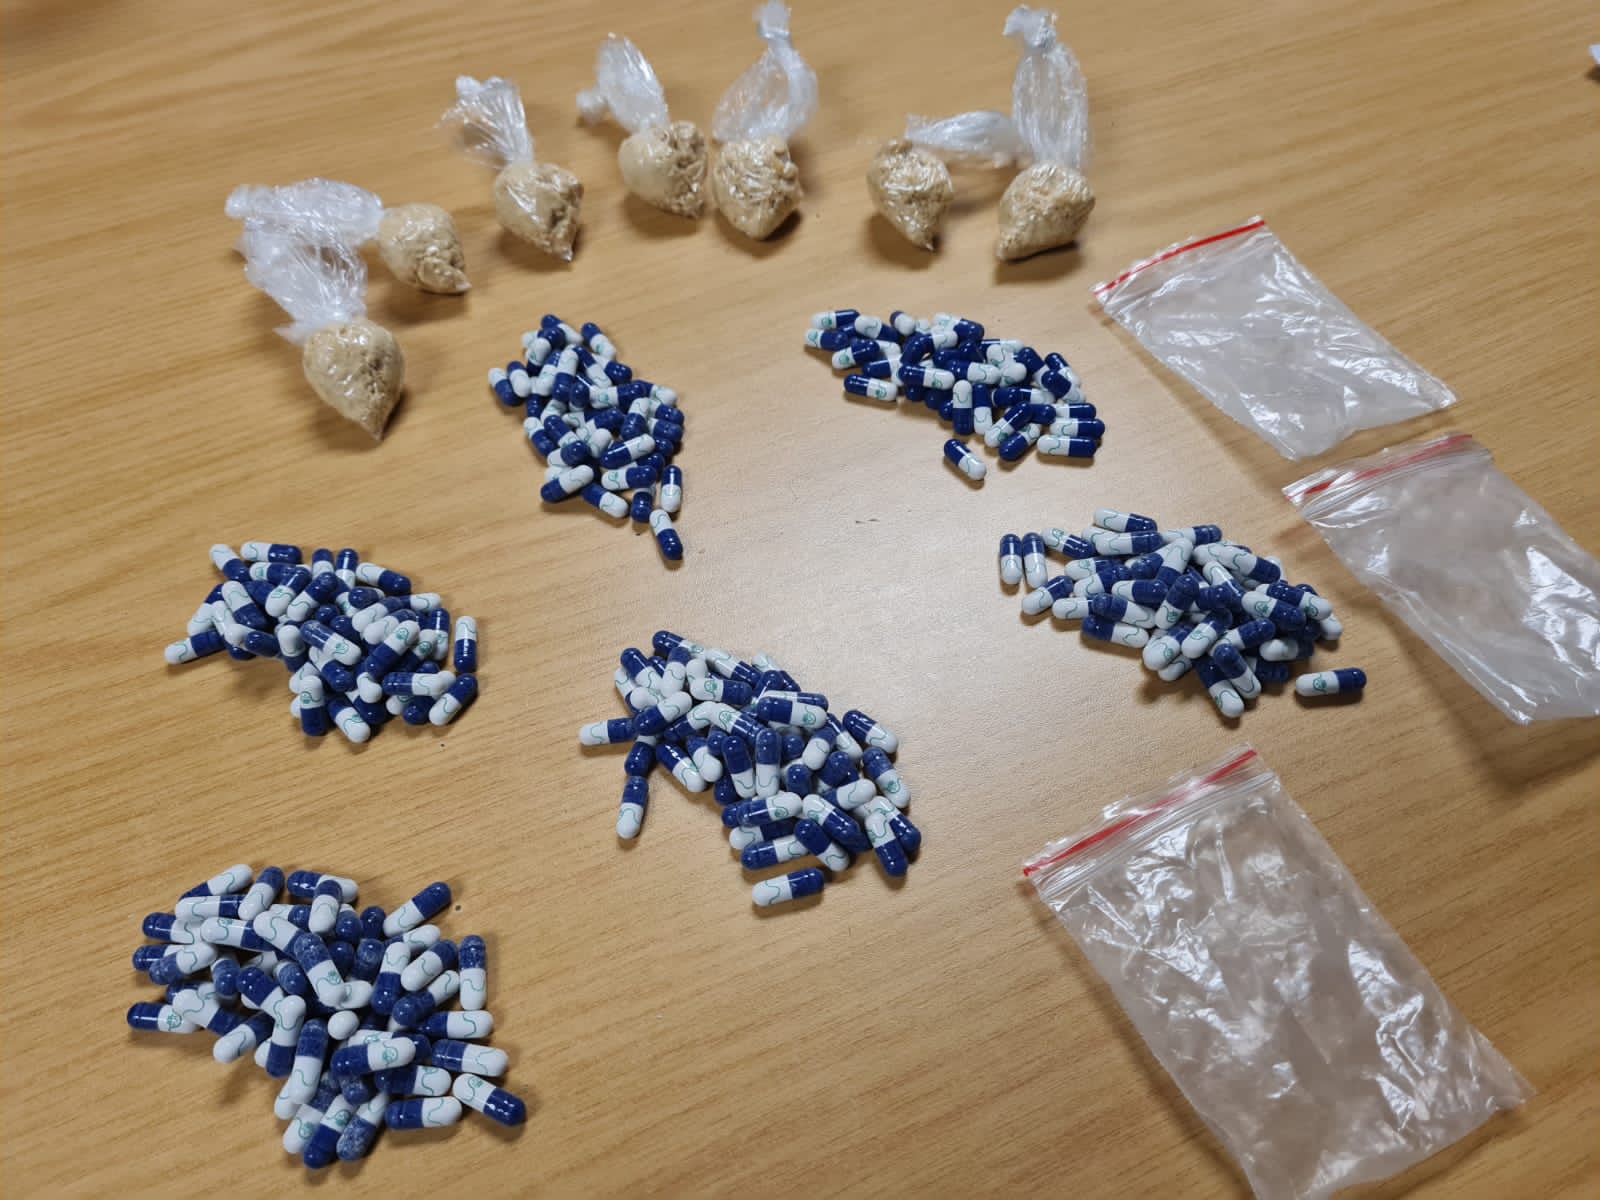 Drugs recovered in an e-hailing vehicle